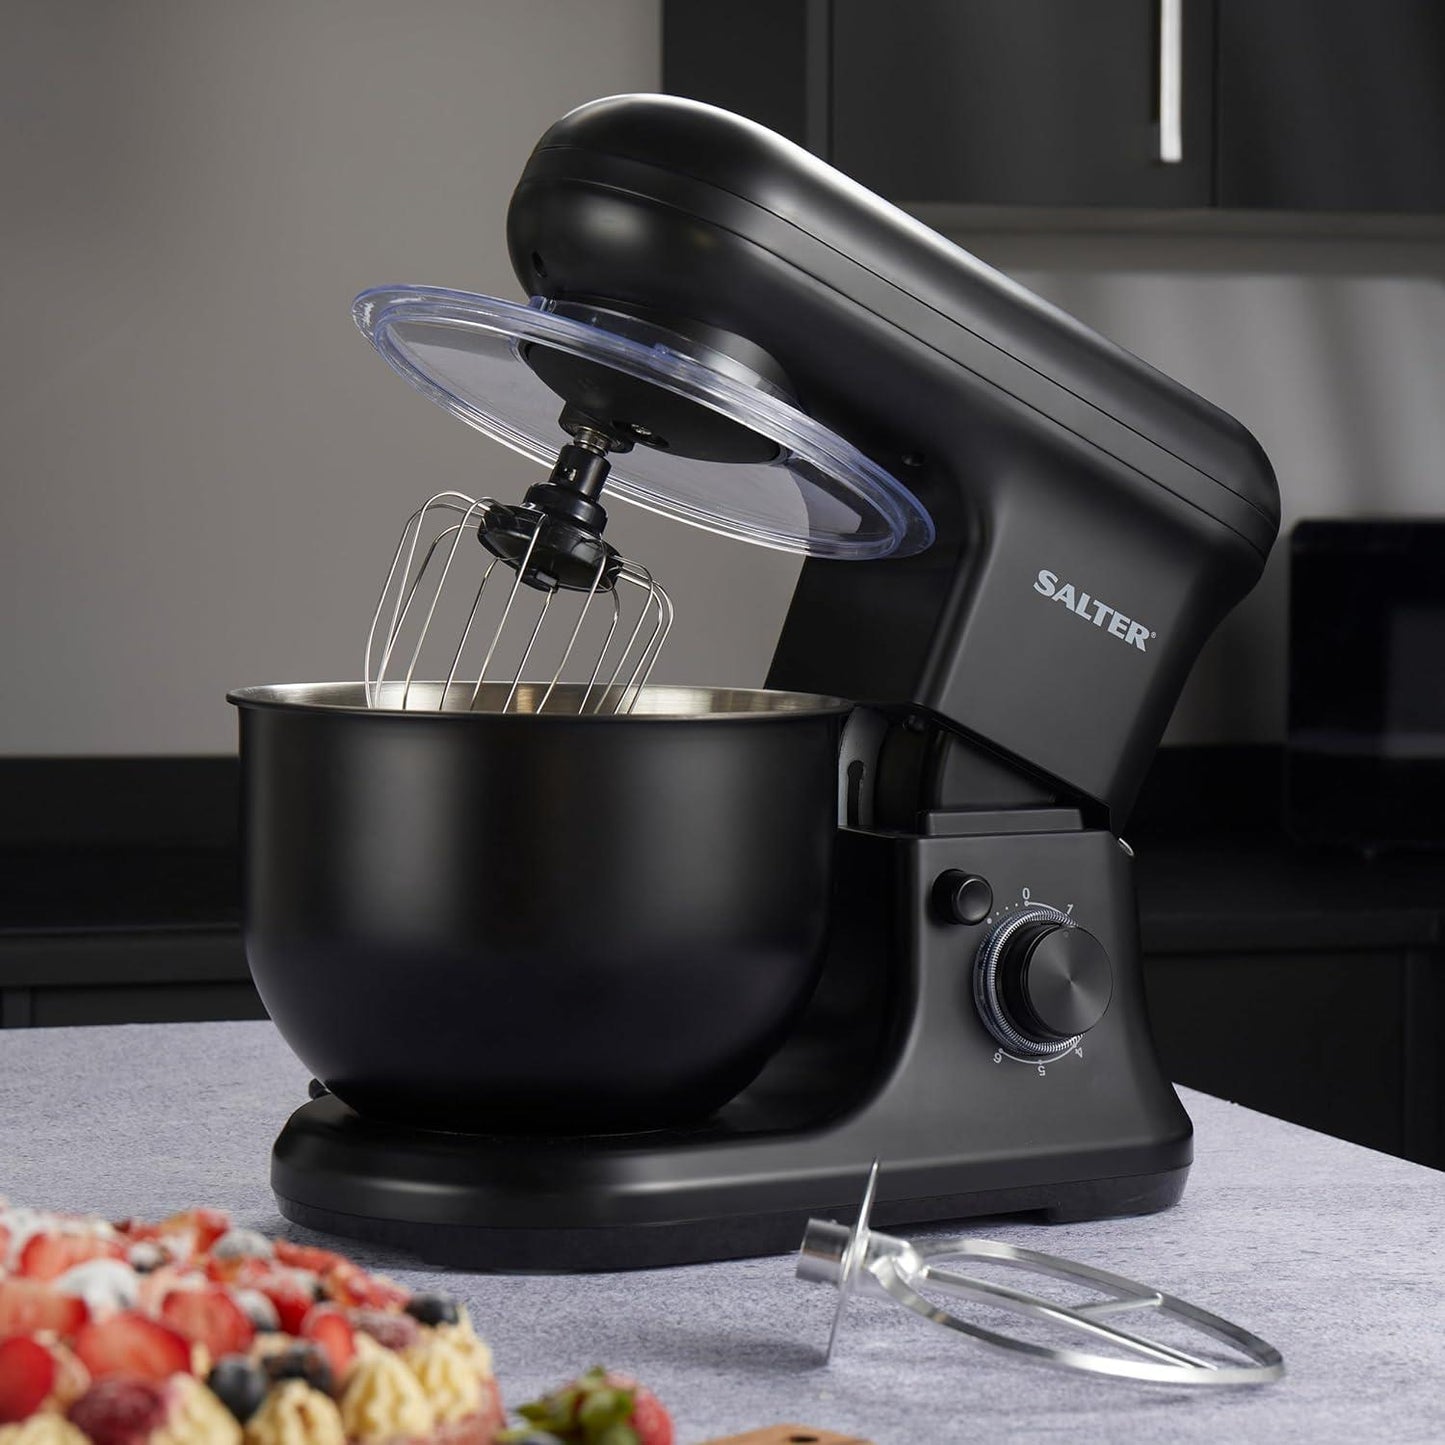 Salter Kuro Stand Mixer1200W, 5L Mixing Bowl with Whisk, Dough Hook, and Beater